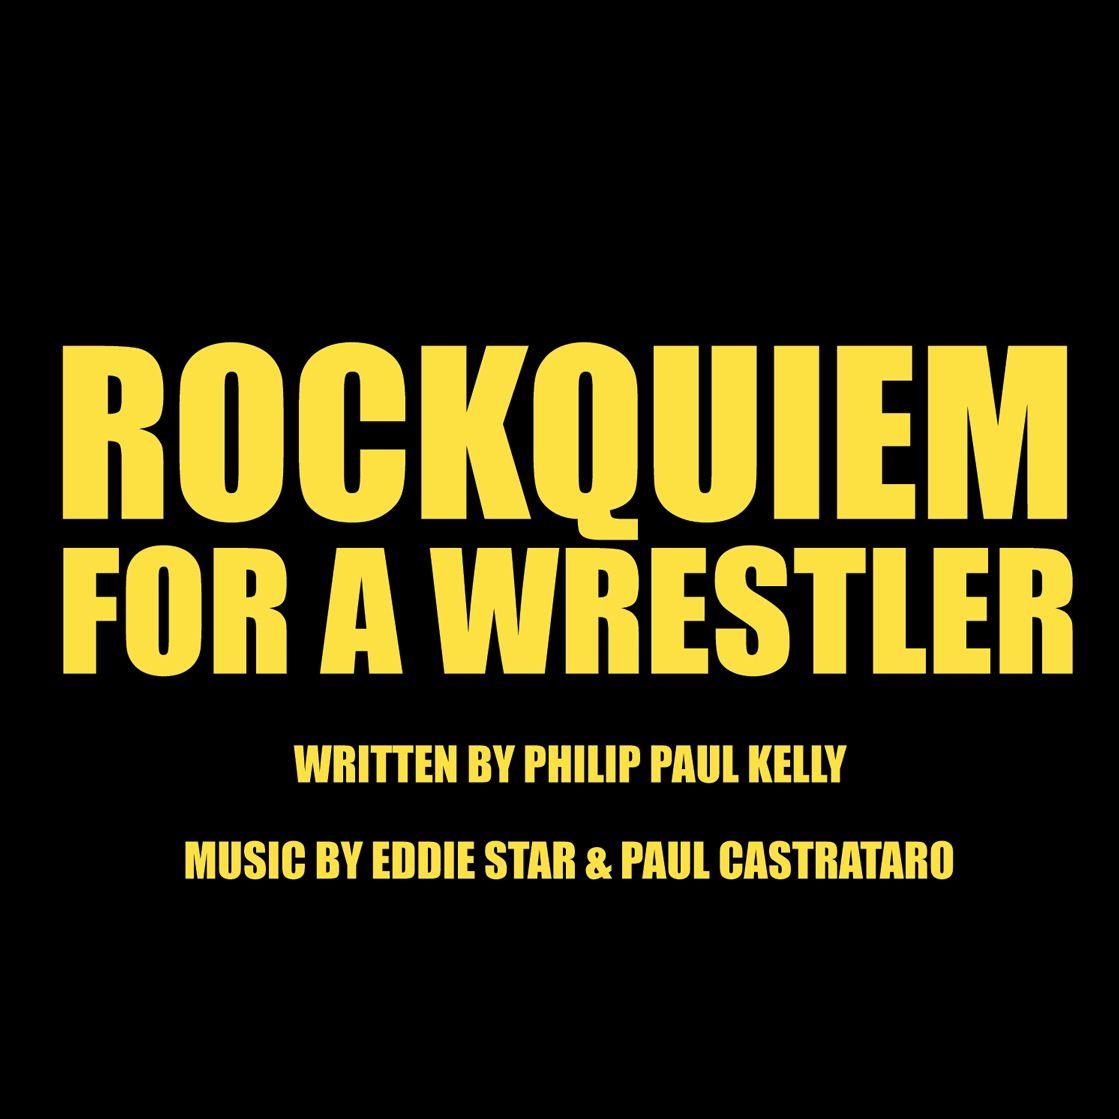 Oh Yeah! 'Rockquiem For A Wrestler' Cast Recording Heads To Digital On October 28, 2022 -- Ton-Up, Inc.